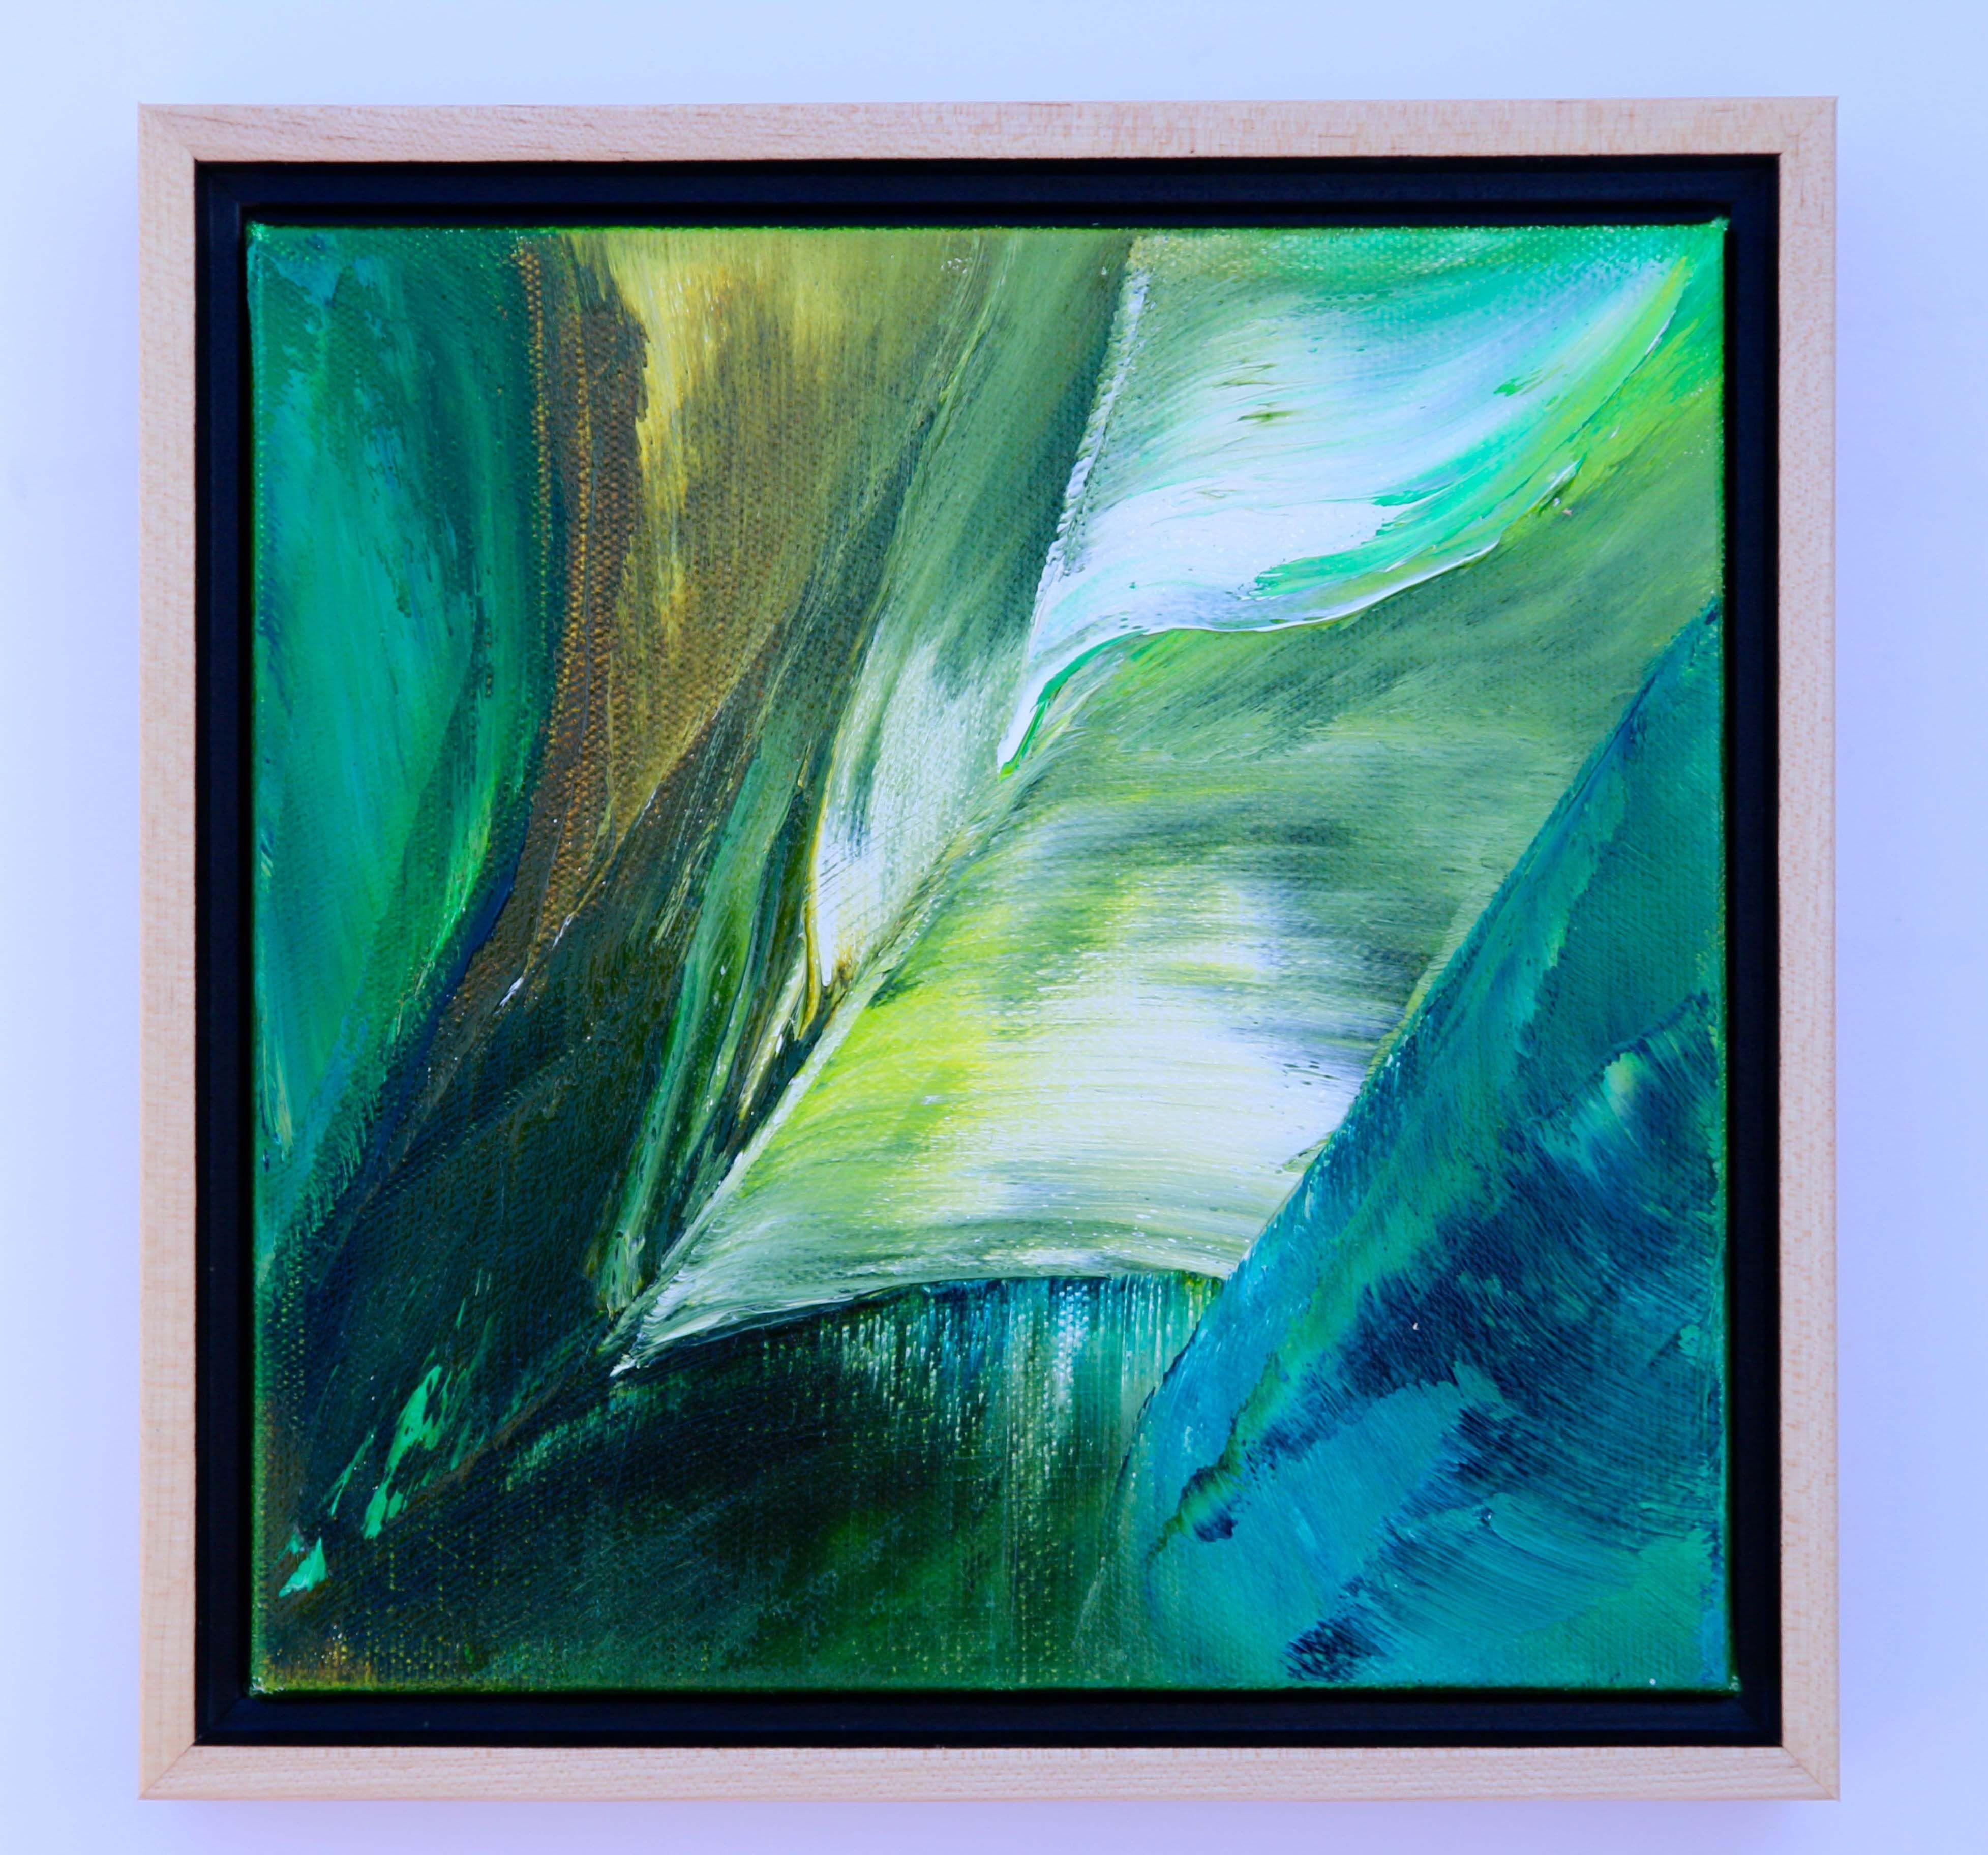 There is something deeply nourishing and refreshing about the color green in nature. This painting is a celebration of the many variations of that beautiful color. The canvas is gallery-wrapped with painted edges, and it's framed in a solid wood